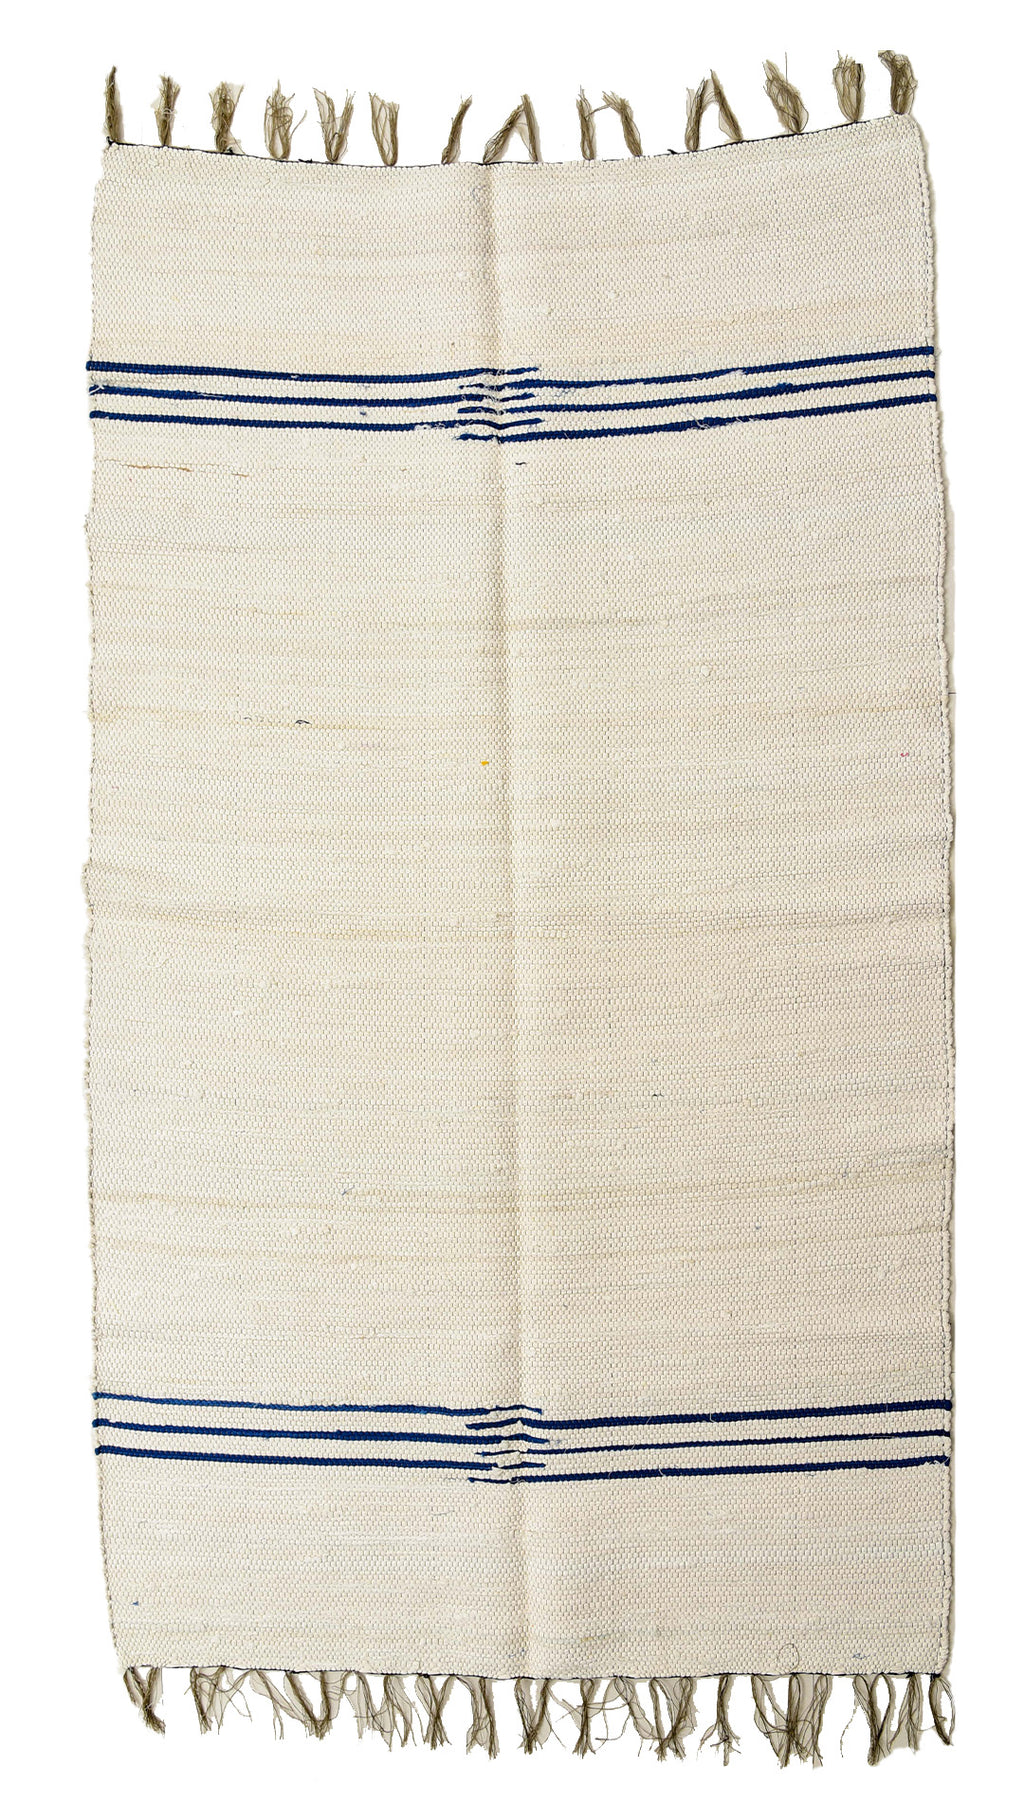 White Rug from textile leftovers - Aavaran Udaipur